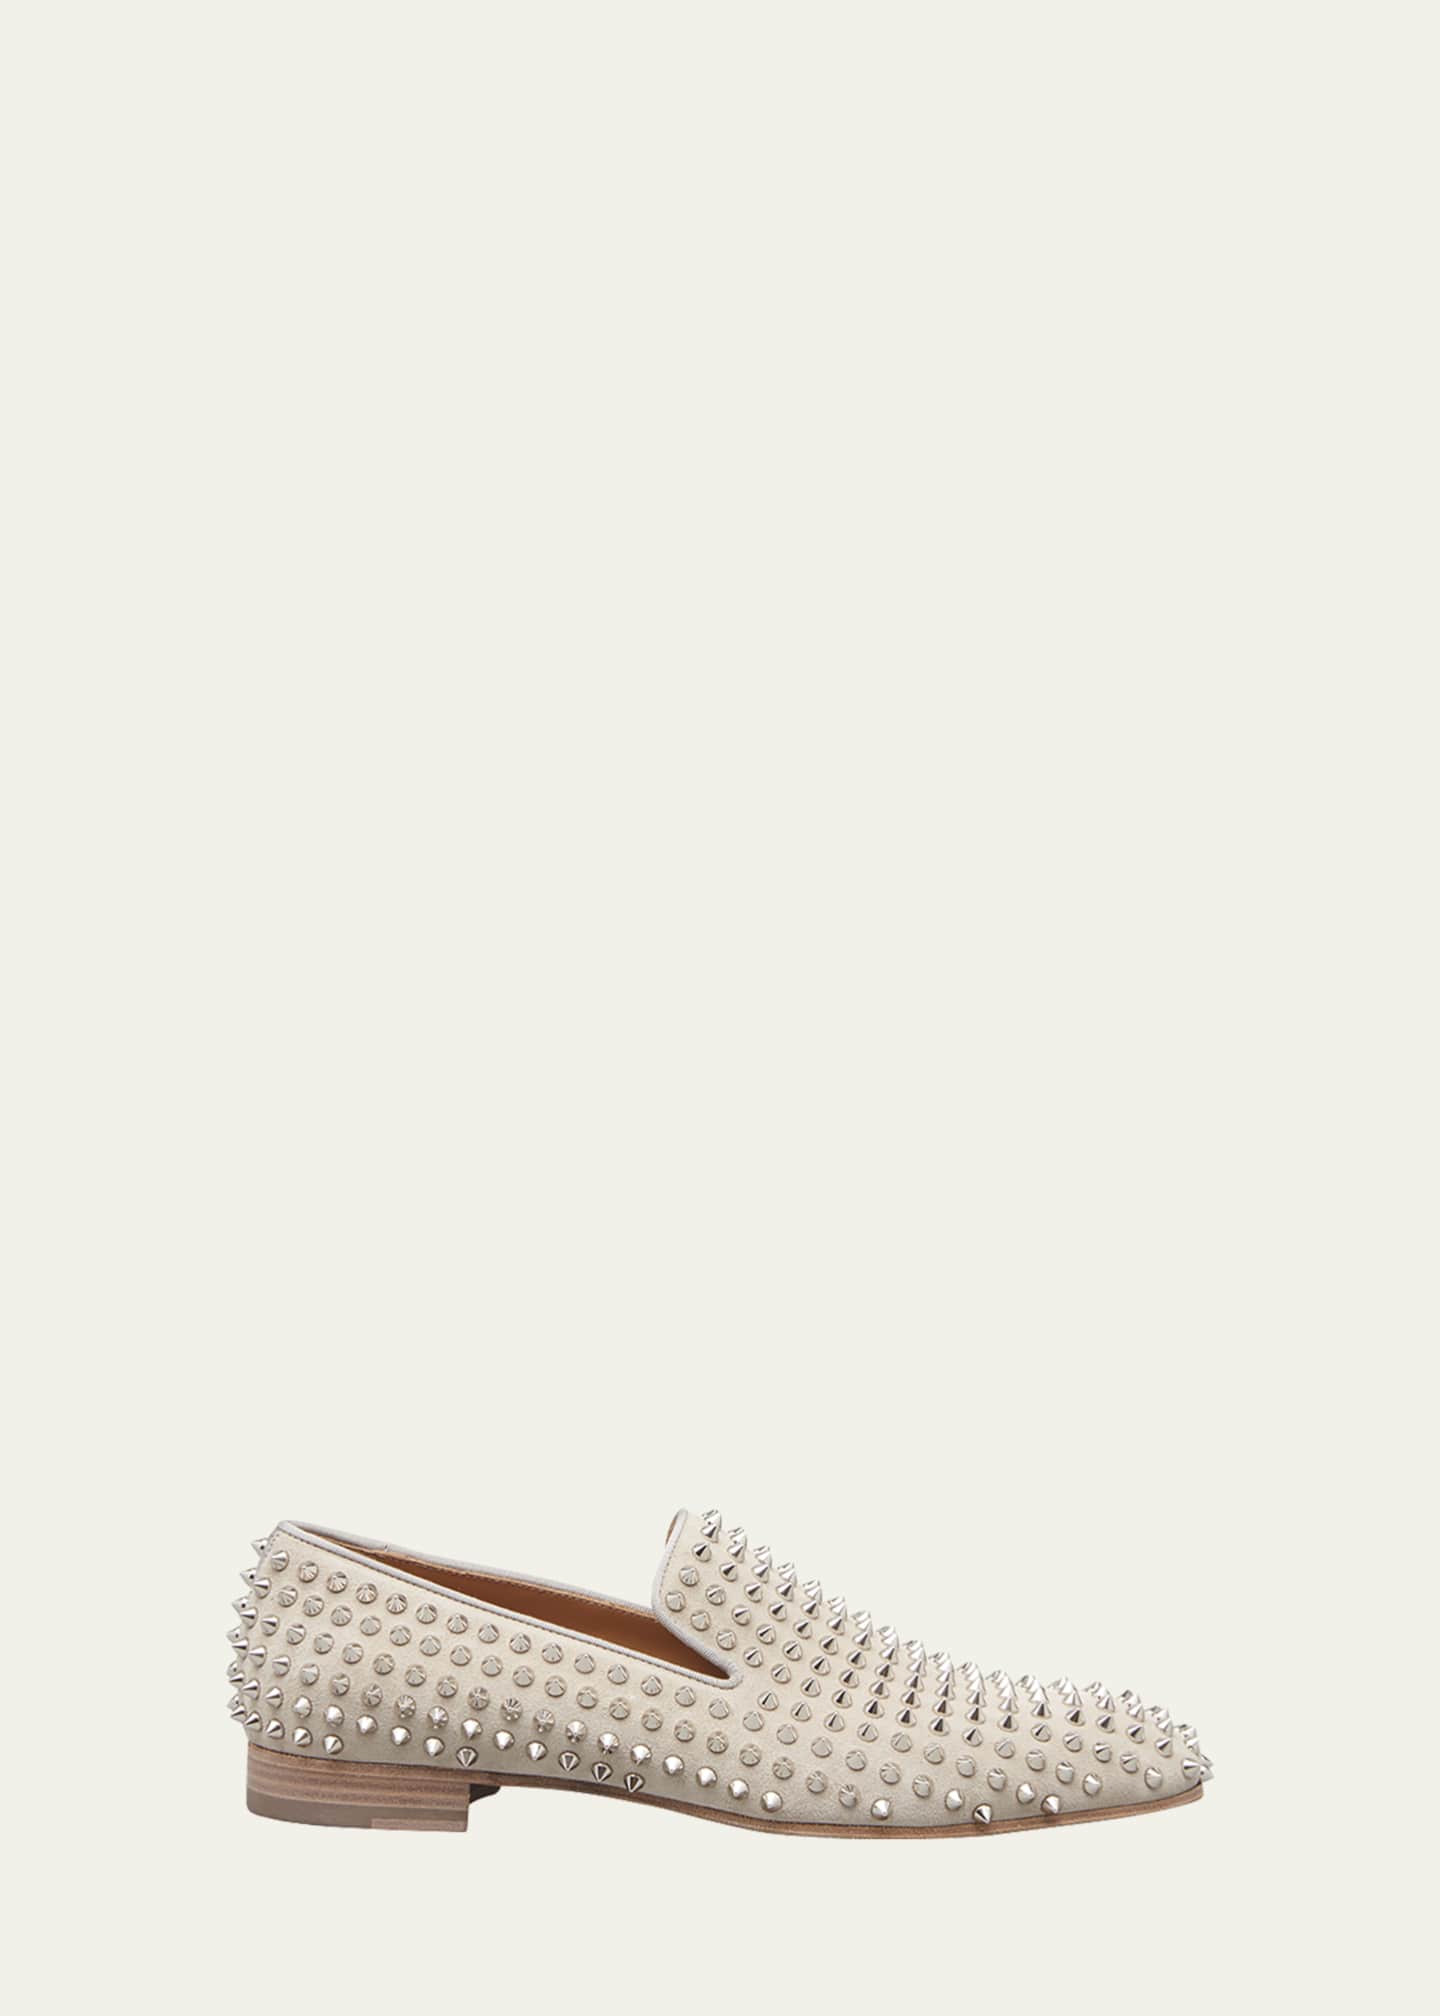 Christian Louboutin Dandelion Spikes Suede Loafers - Bergdorf